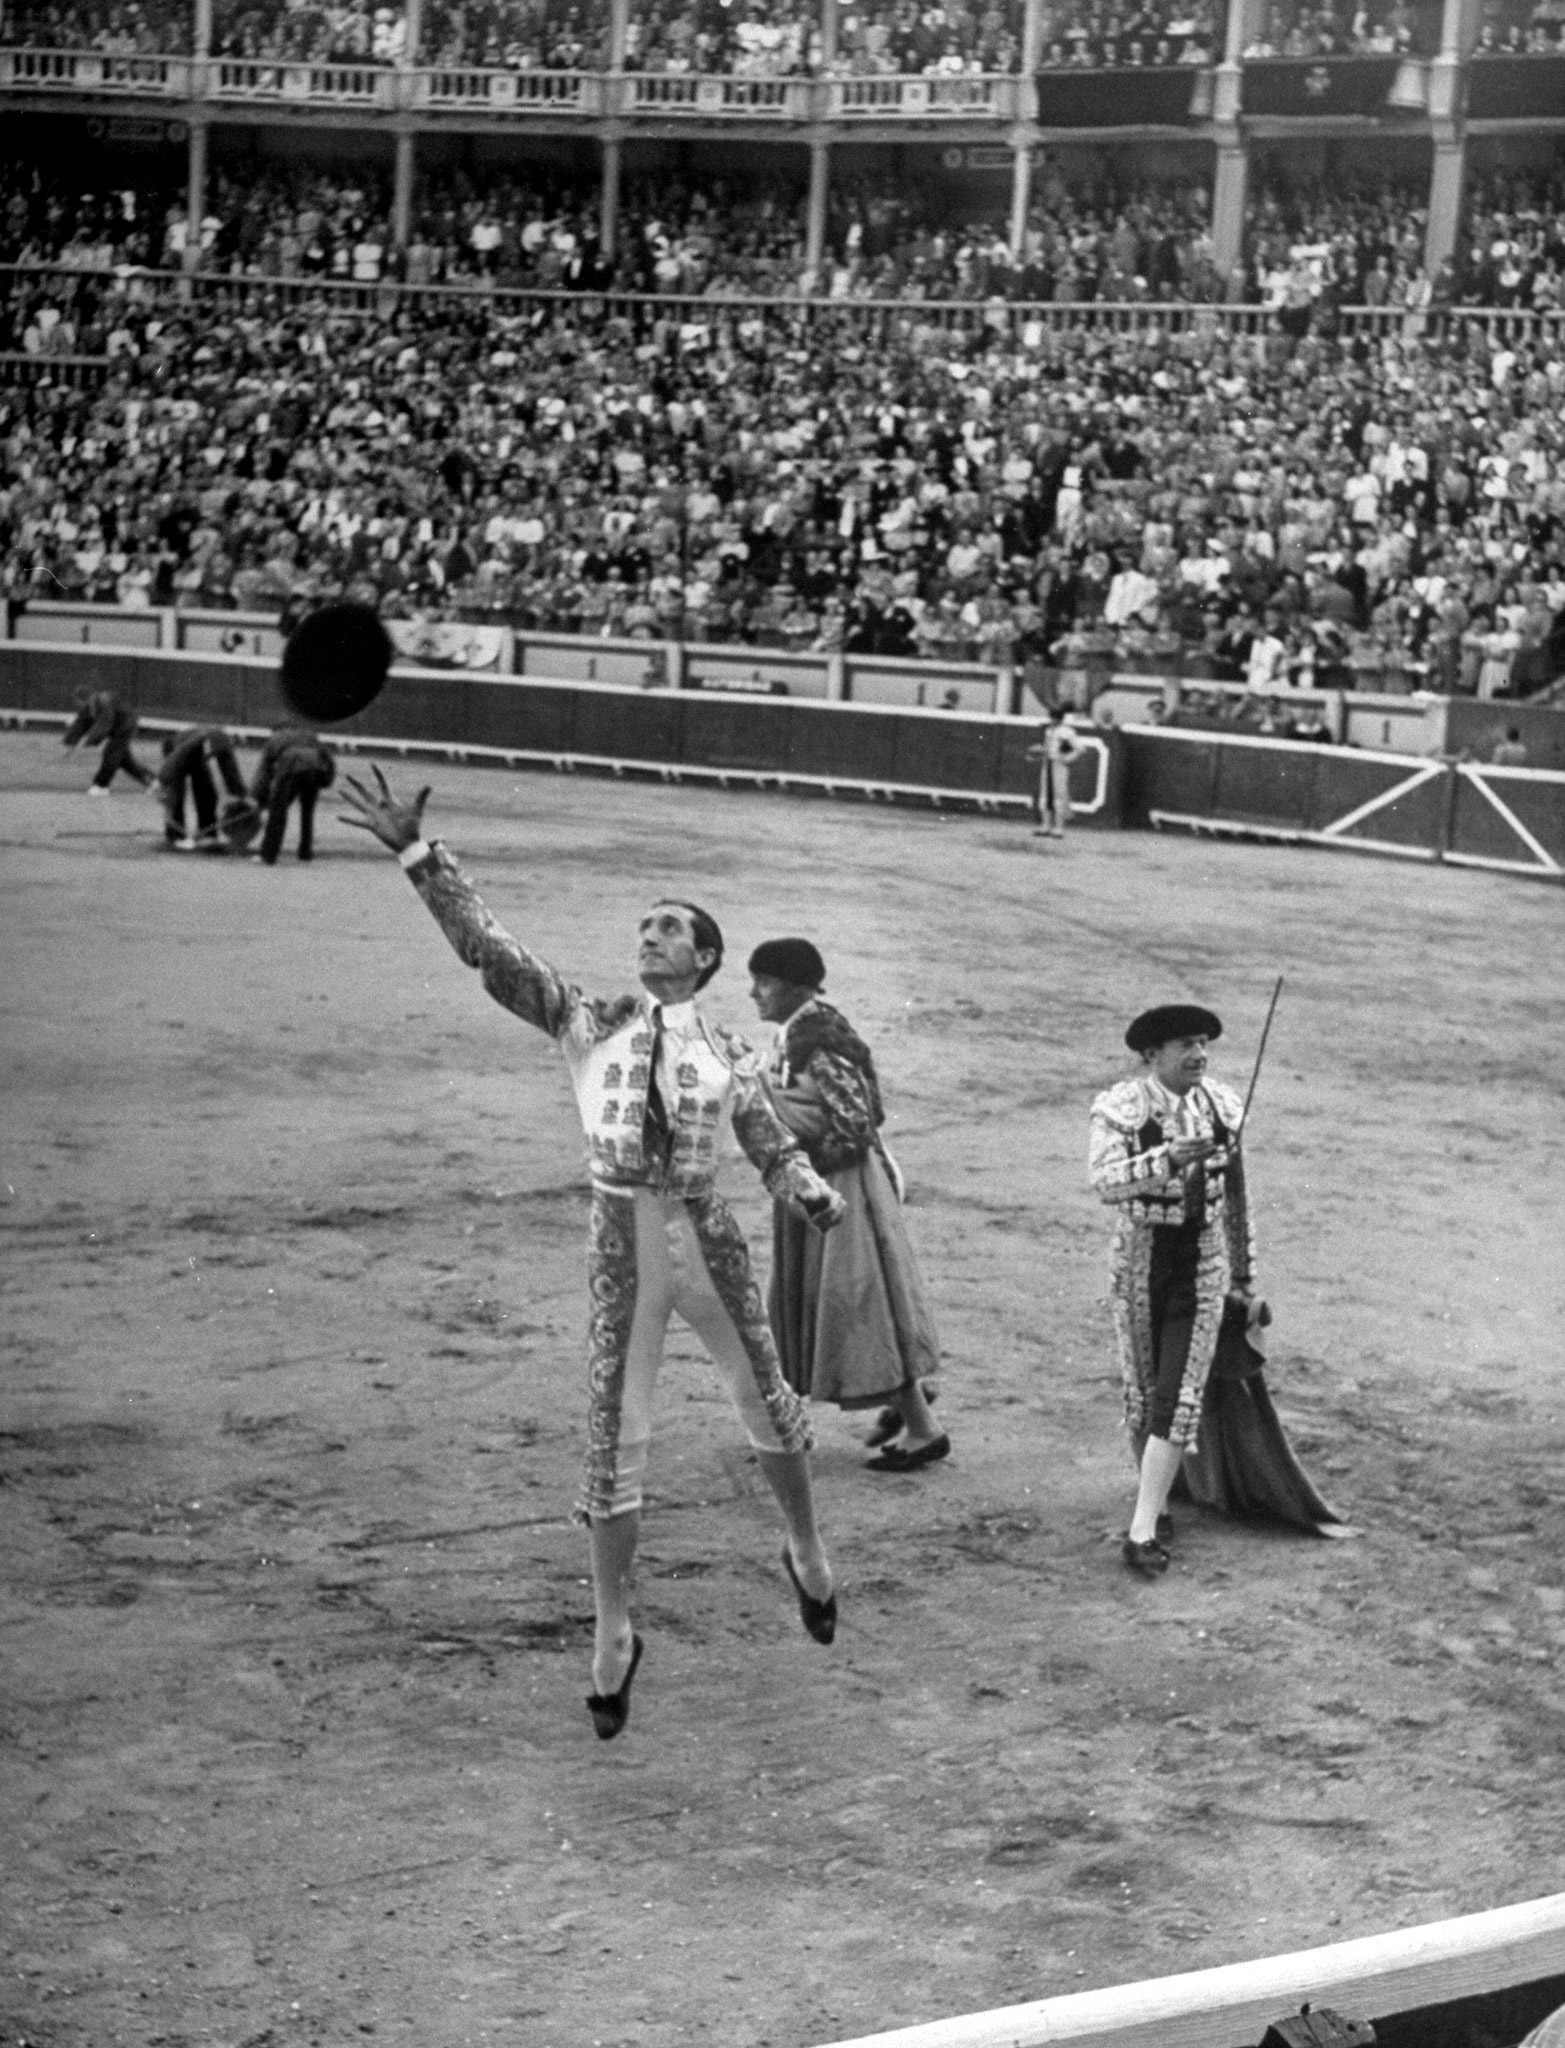 Matador Julian Marin acknowledging the crowd after a masterful performance during a bullfight held during celebration of the festival of San Fermín.